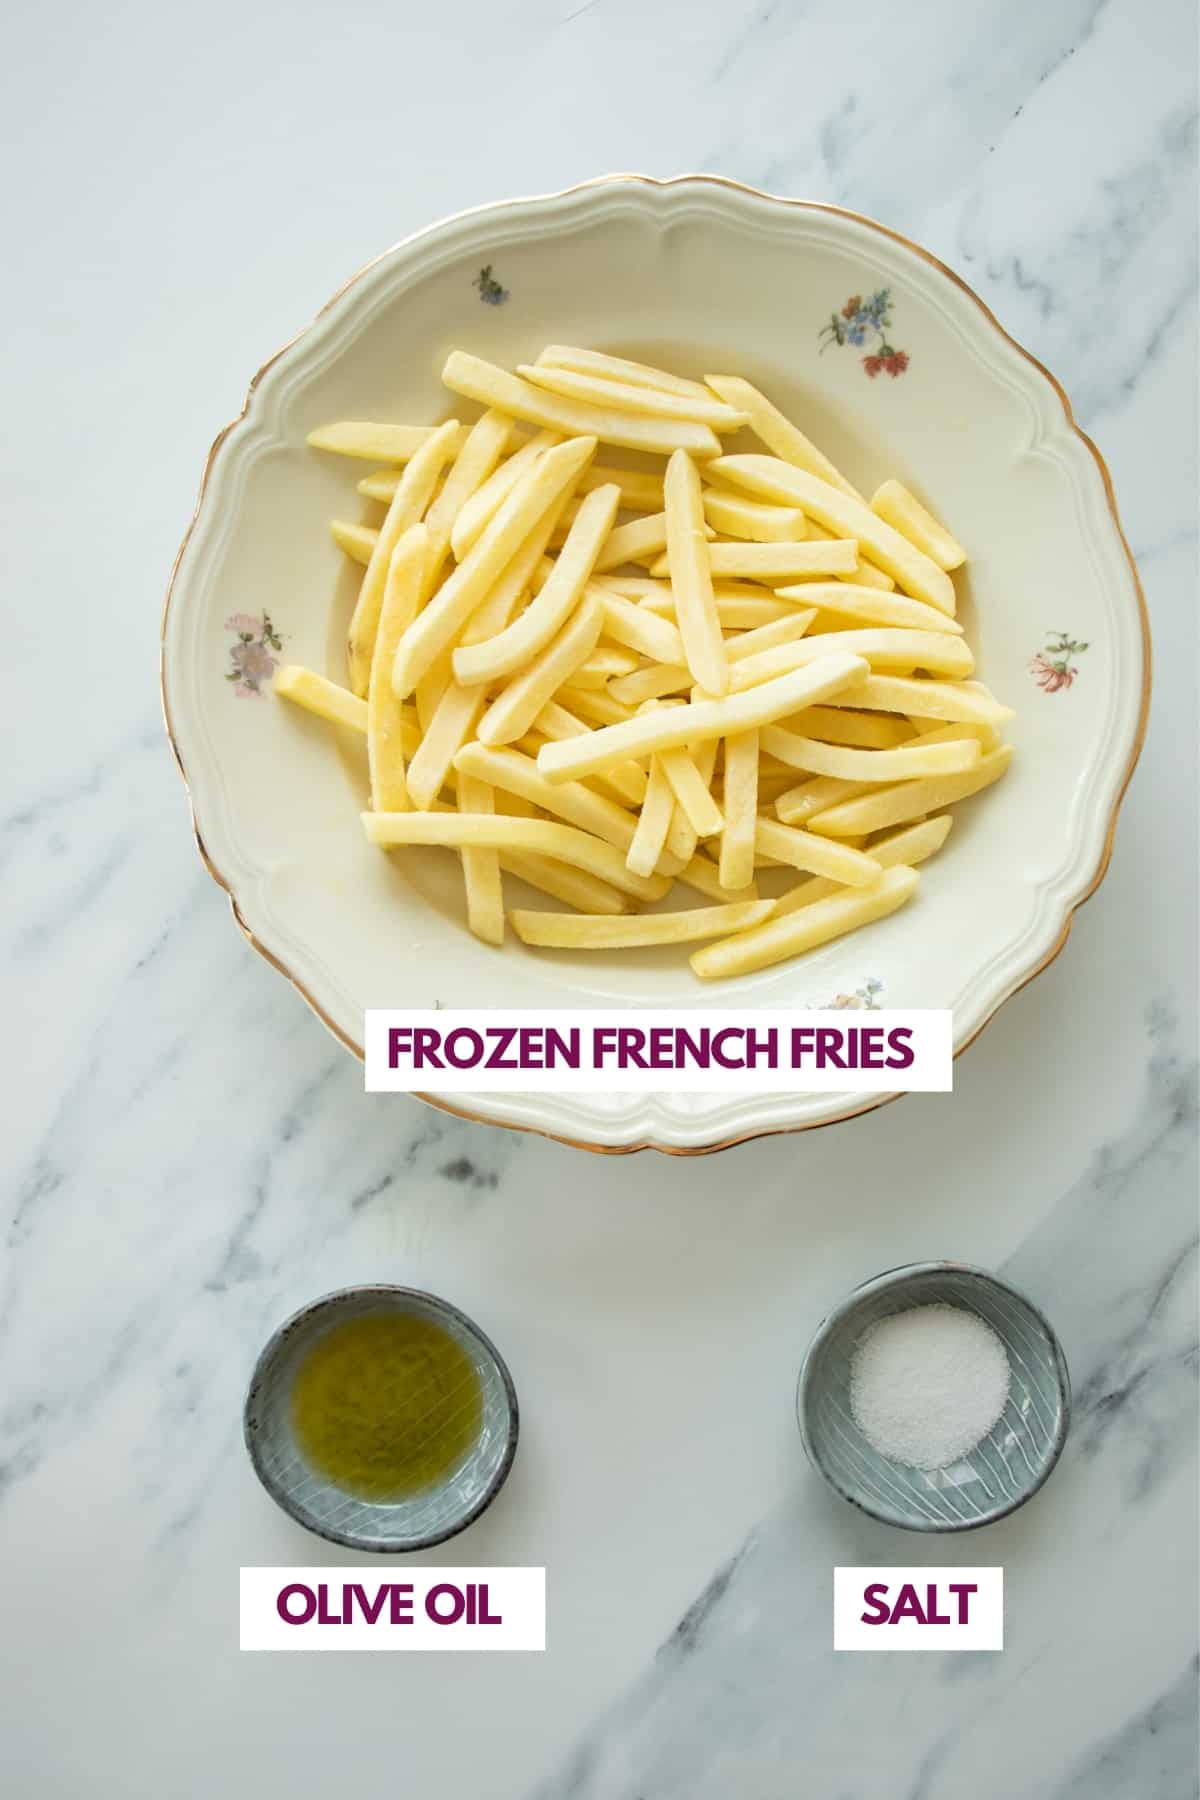 ingredients for making frozen french fries in air fryer.